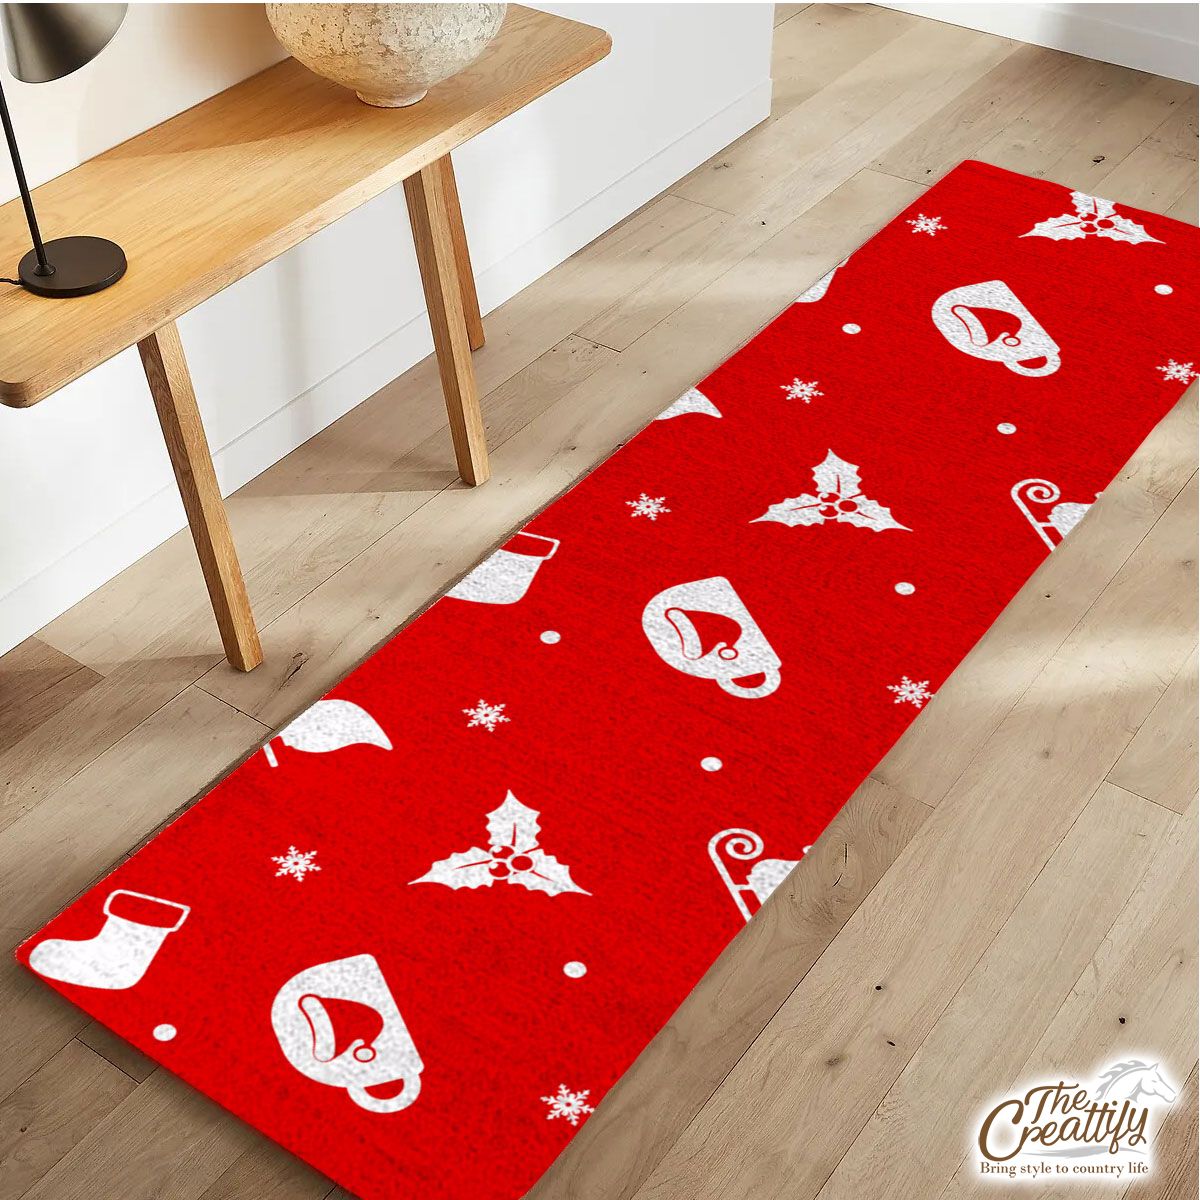 Red And White Santa Sleigh, Holly Leaf With Snowflake Runner Carpet